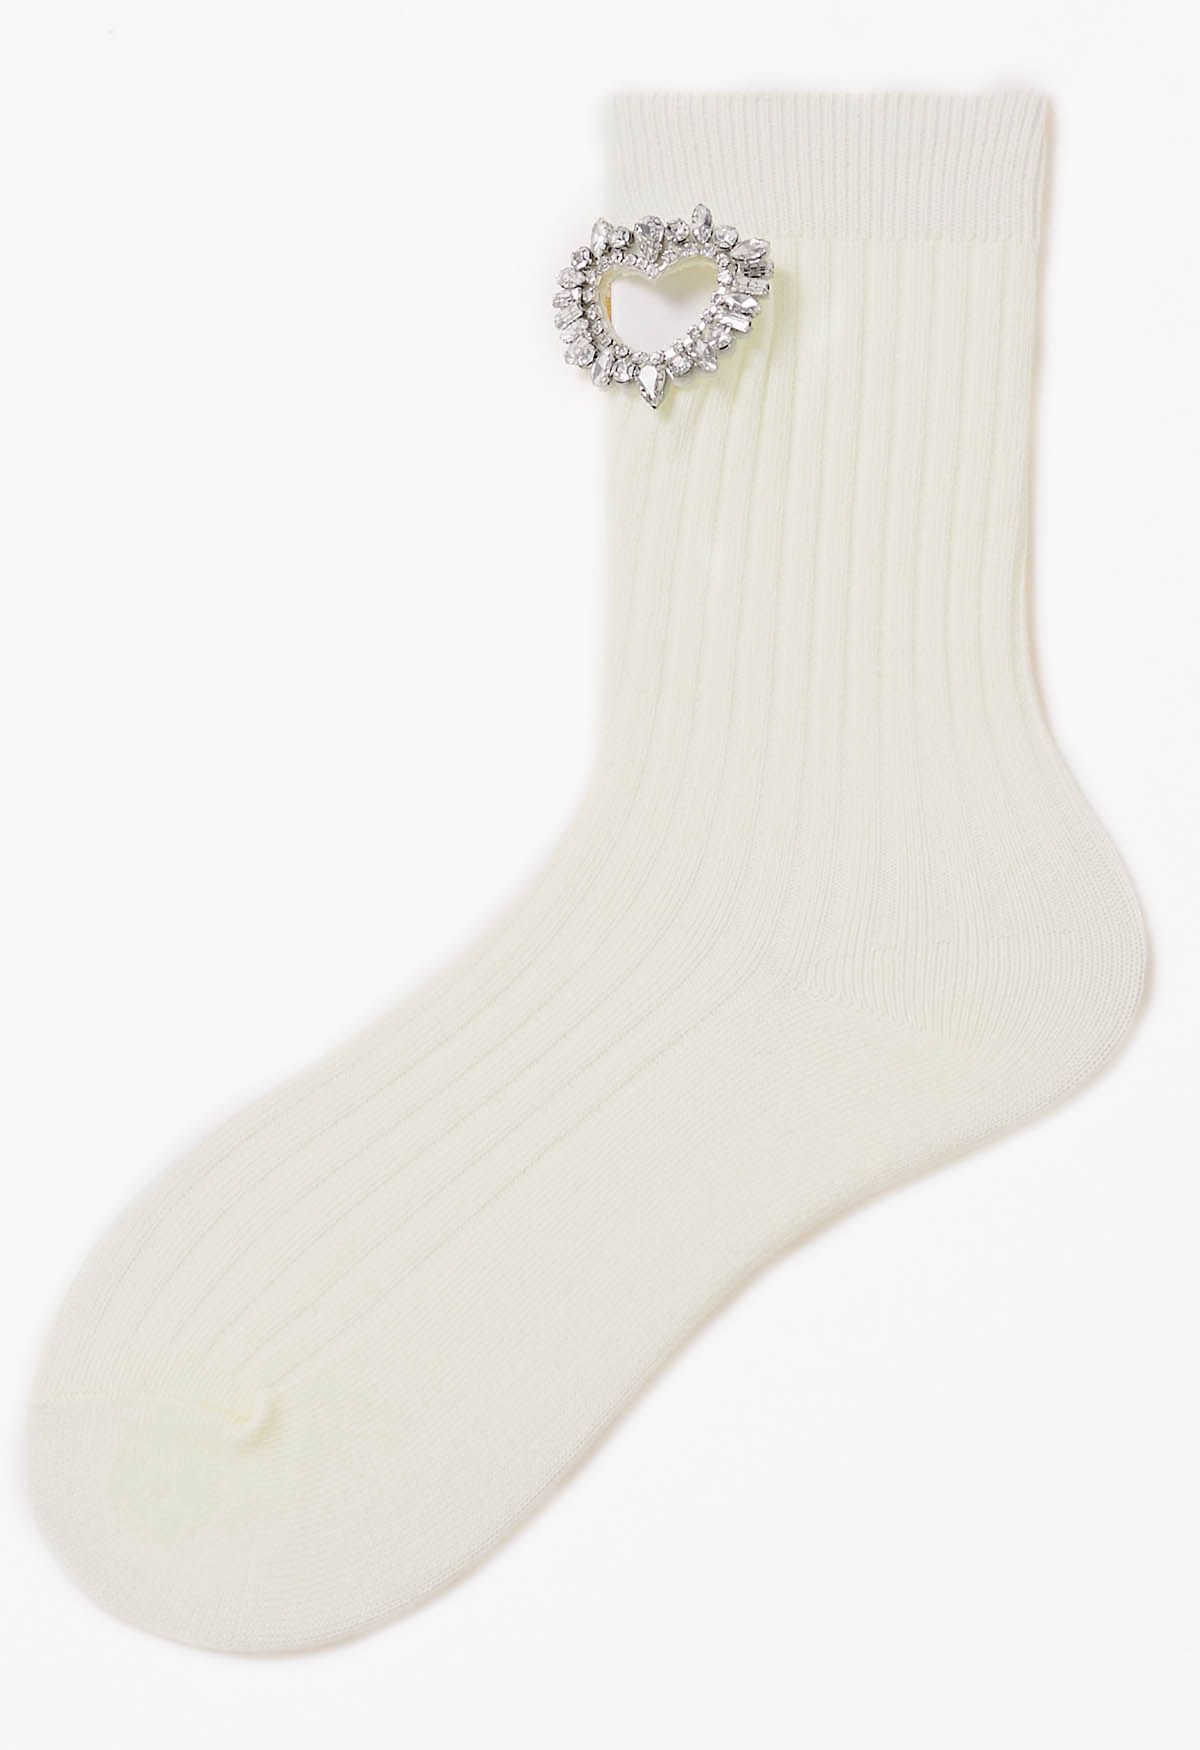 Rhinestone Hollow Out Heart Cotton Socks in White